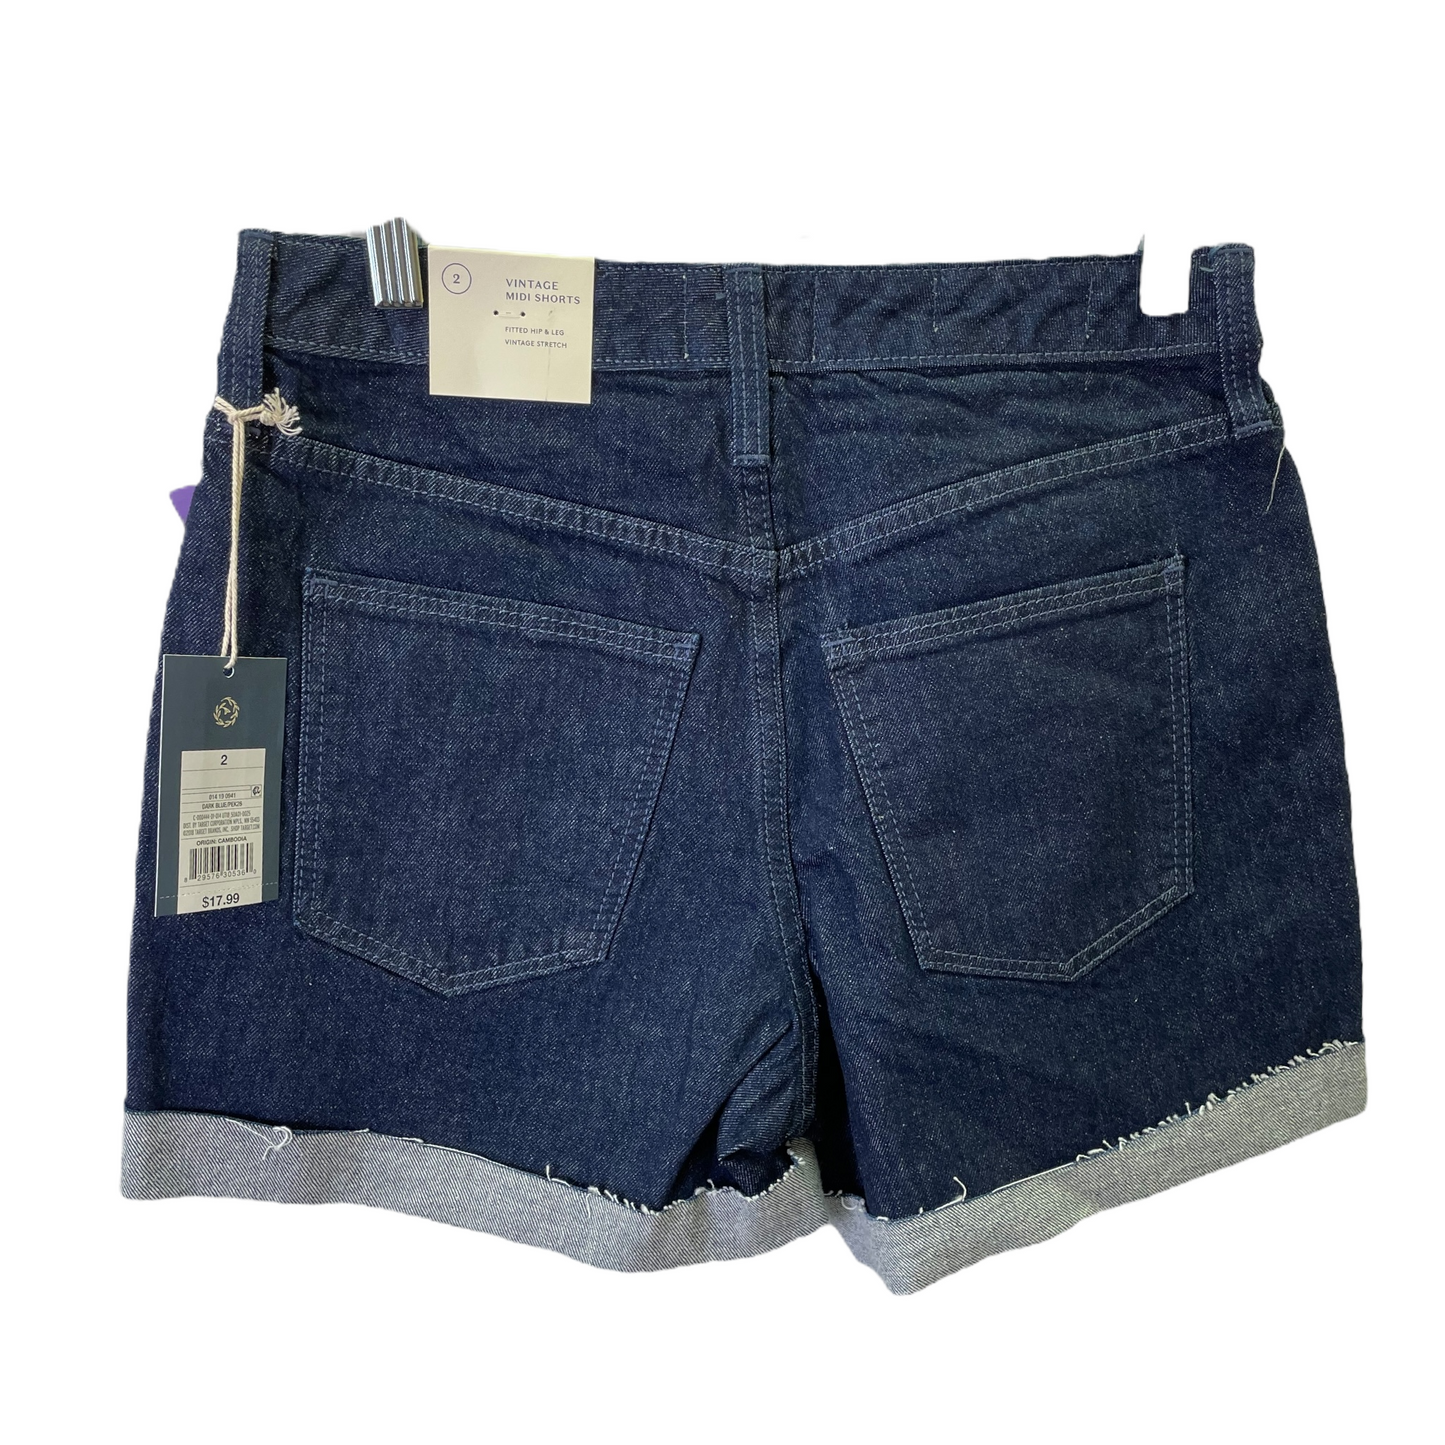 Blue Shorts By Universal Thread, Size: 4